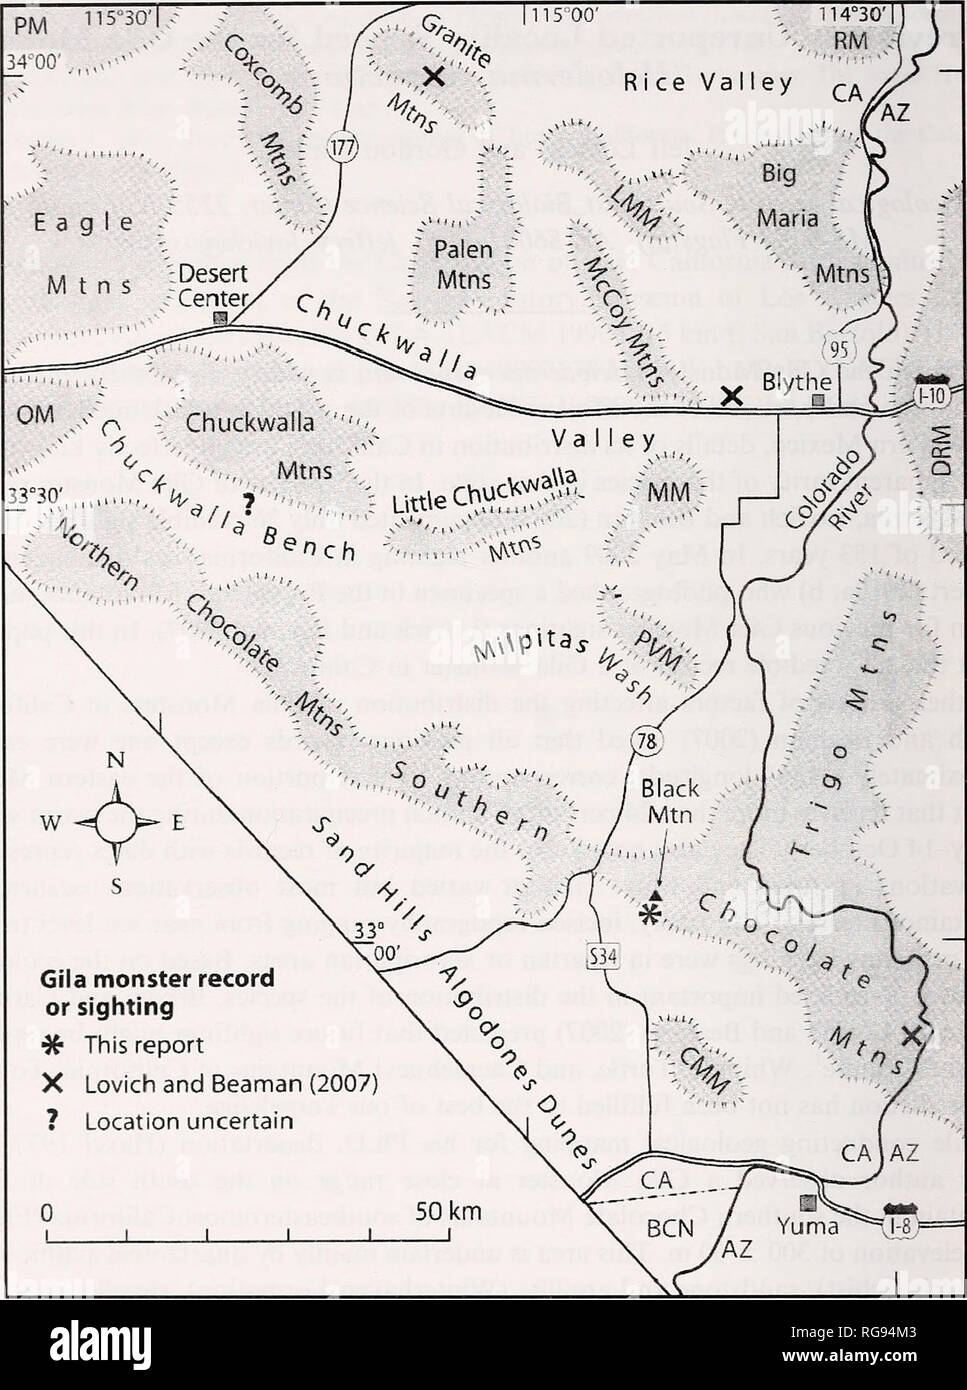 . Bulletin - Southern California Academy of Sciences. Science. 60 SOUTHERN CALIFORNIA ACADEMY OF SCIENCES. Fig. 1. The five Gila Monster records and sightings in the southeast corner of California. CMM, Cargo Muchacho Mountains; DRM, Dome Rock Mountains; LMM, Little Maria Mountains; MM, Mule Mountains; OM, Orocopia Mountains; PM, Pinto Mountains; PVM, Palo Verde Mountains; RM, Riverside Mountains. easting and northing, the UTM zone is 11, and the datum is NAD 27). This area, in the Quartz Peak 7.5' quadrangle (1988), is « 2 km south-southwest of the prominent cluster of communications towers o Stock Photo